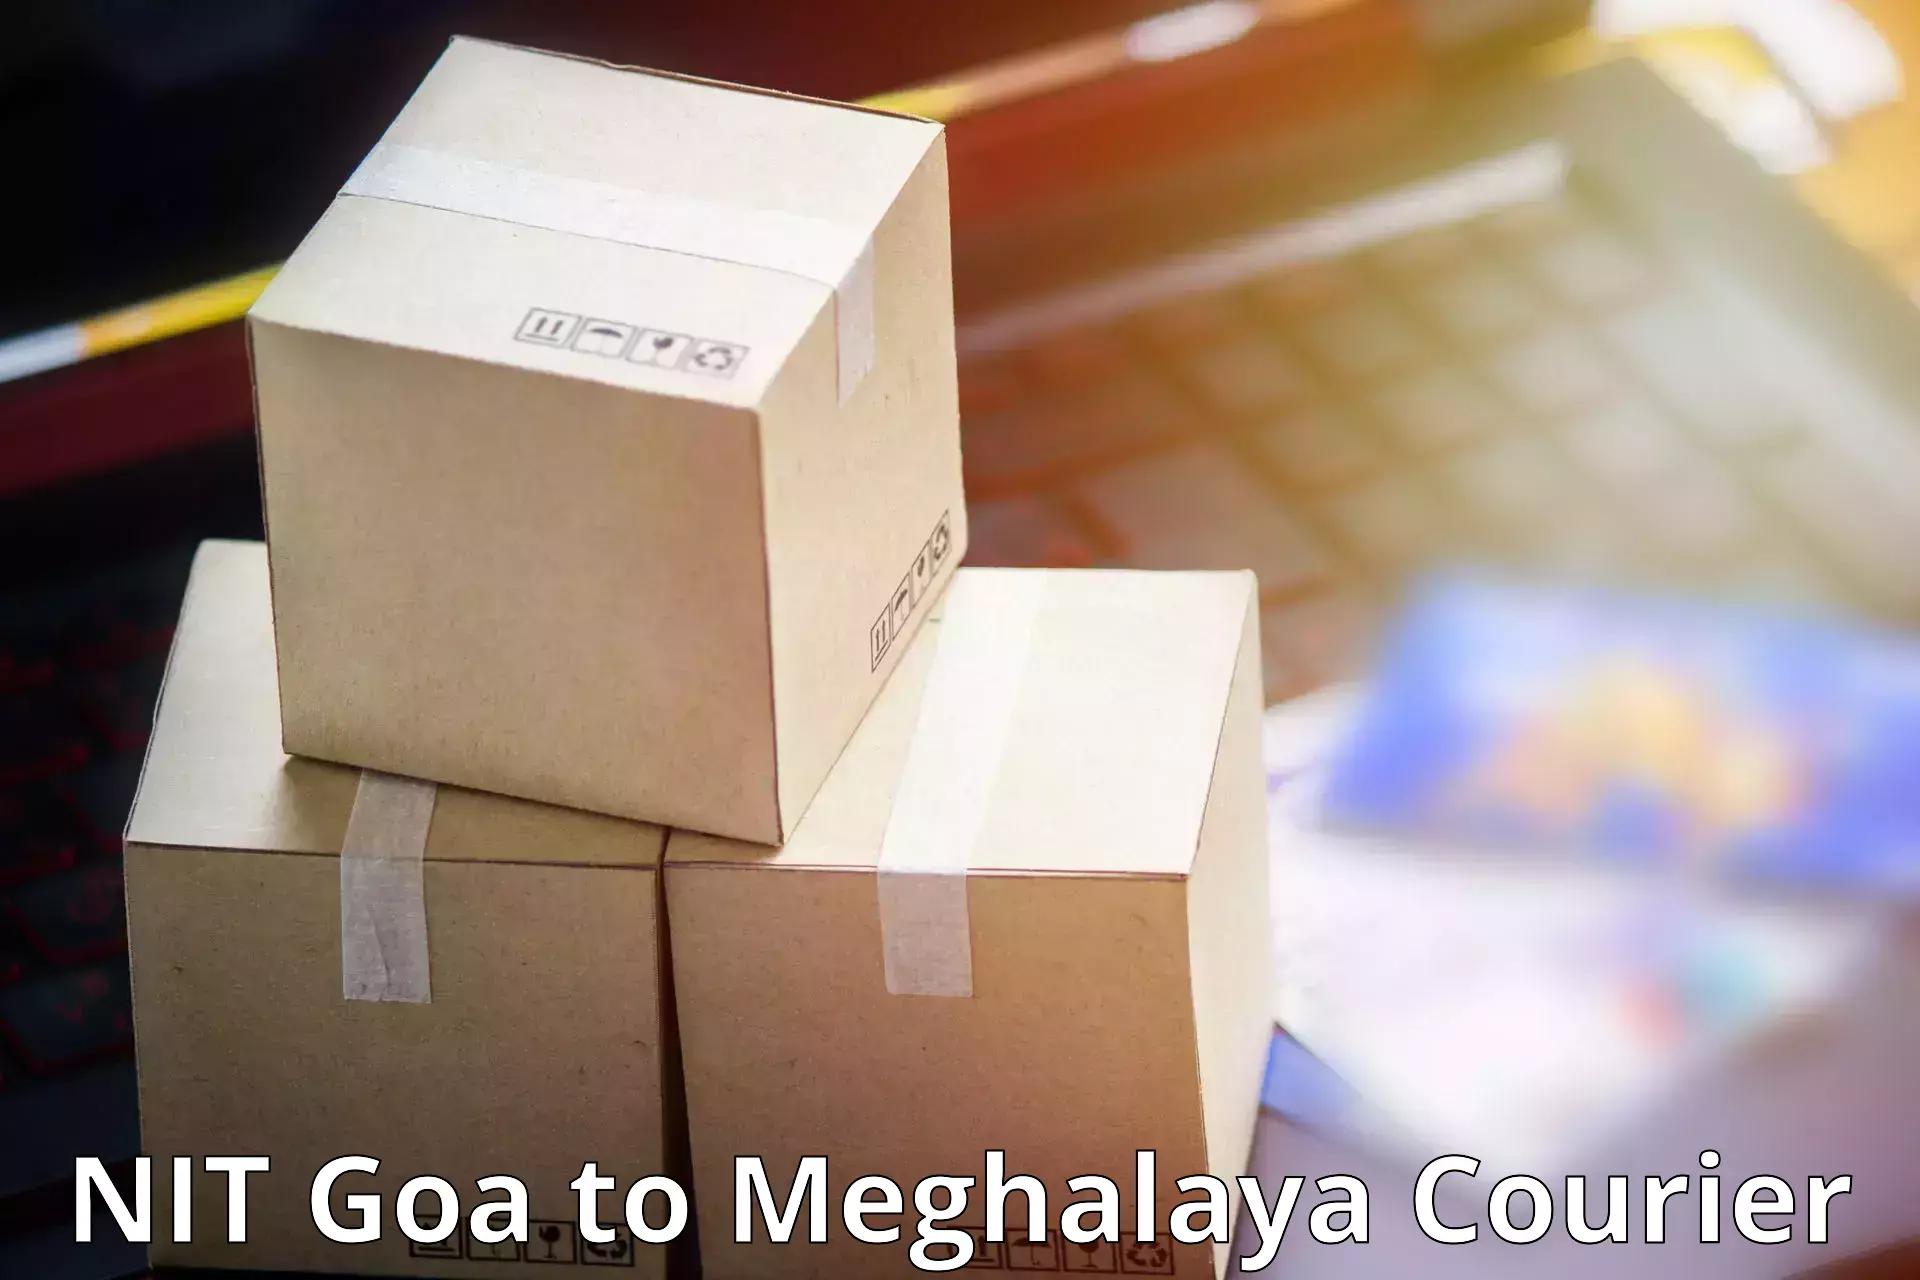 User-friendly courier app NIT Goa to Shillong